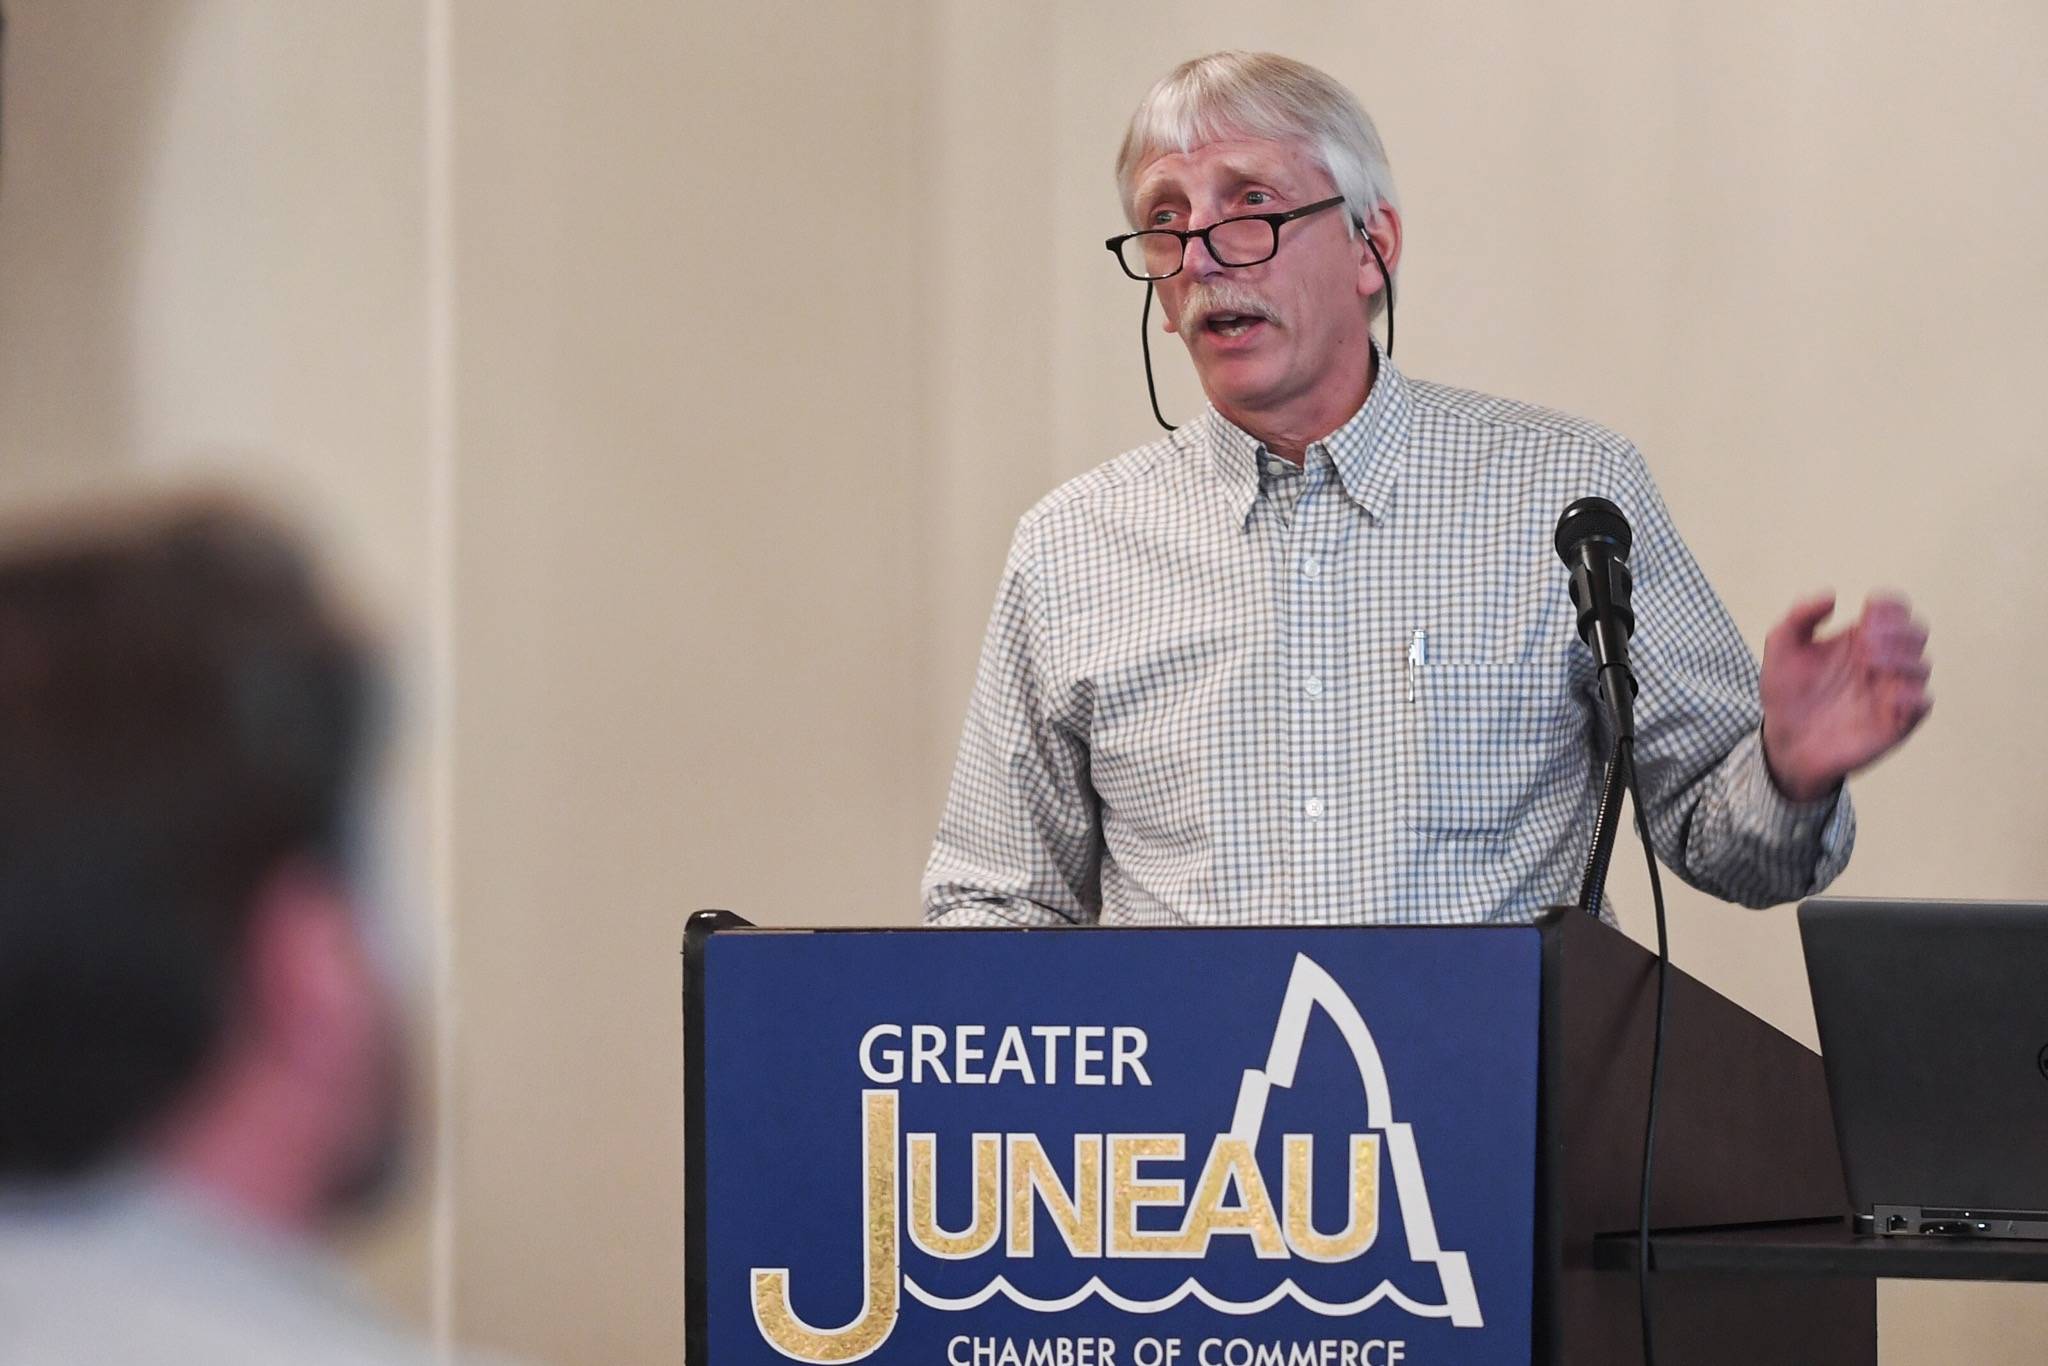 CBJ Finance Director Bob Bartholomew speaks to the Juneau Chamber of Commerce during its weekly luncheon at the Moose Lodge on Thursday, May 23, 2019. (Michael Penn | Juneau Empire)